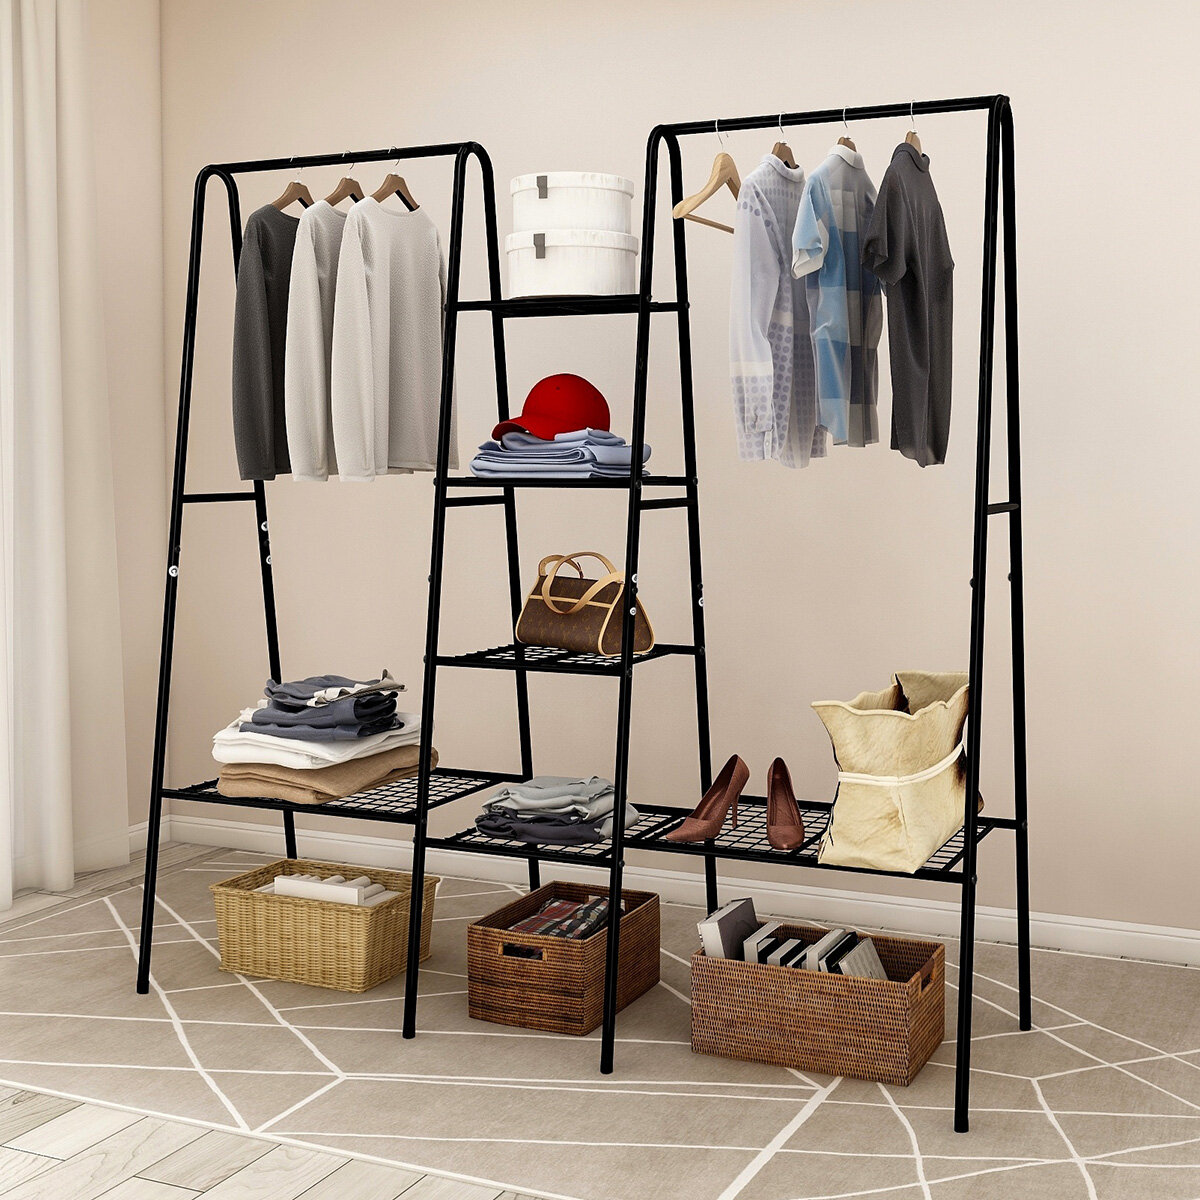 Clothes Racks Garment Wardrobes See more ideas about beige aesthetic, aesthetic, beige. clothes racks garment wardrobes